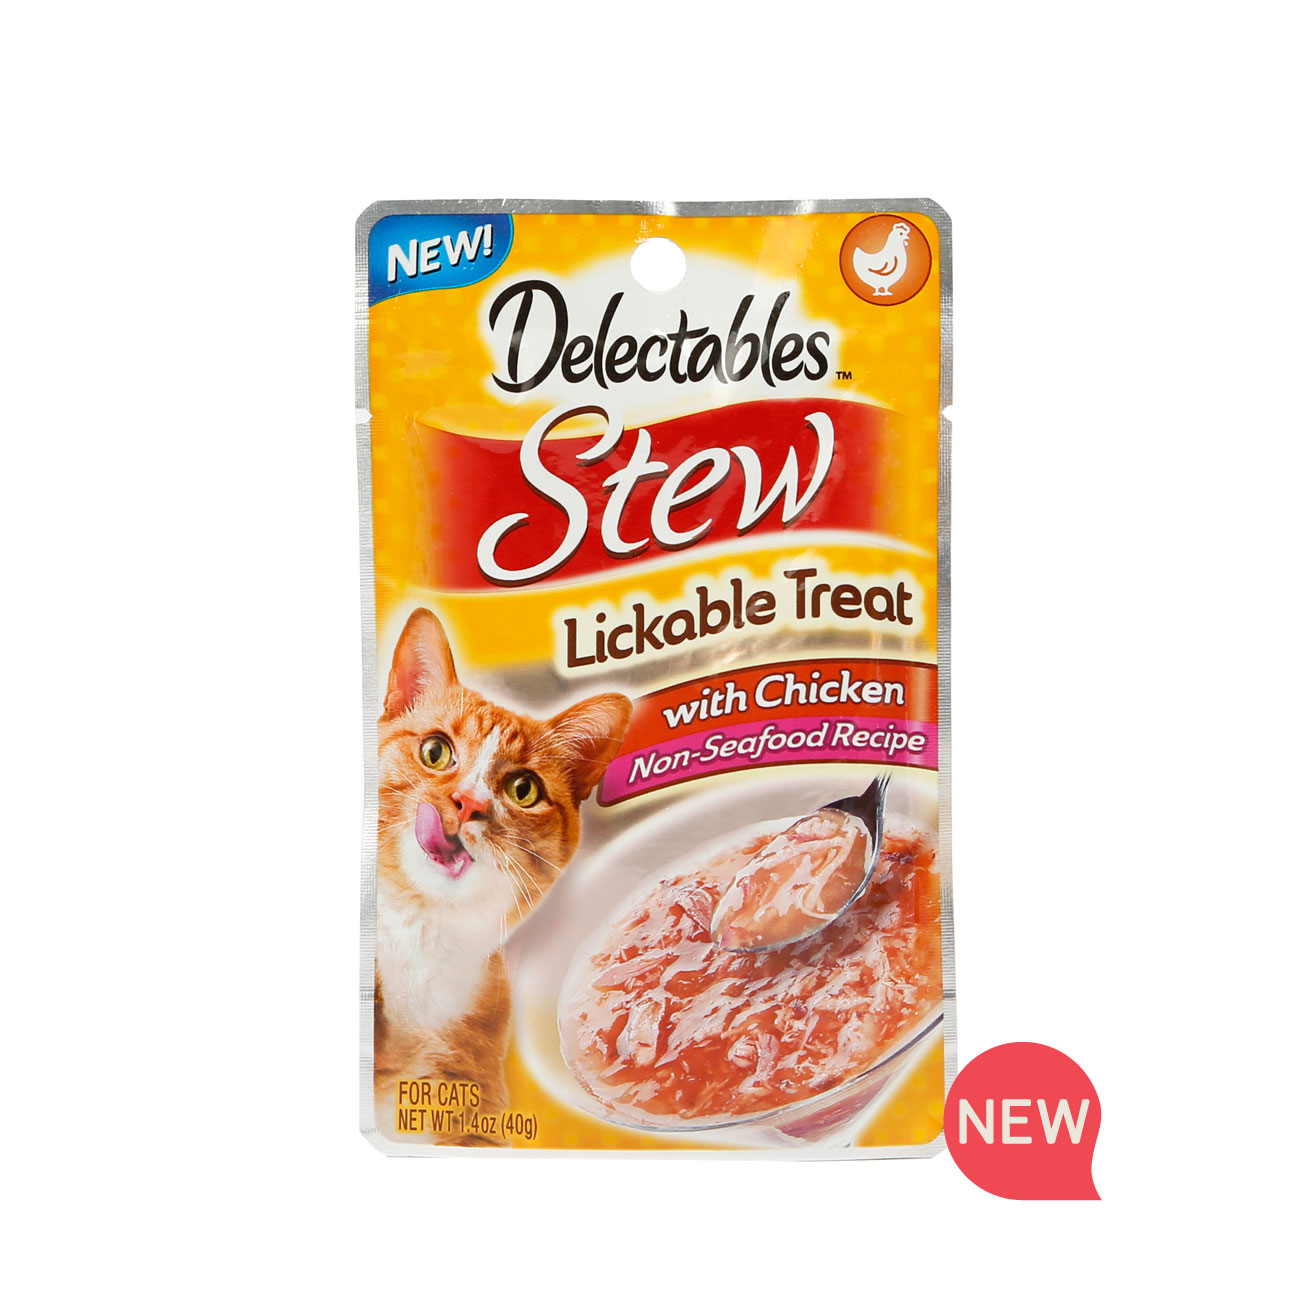 Hartz Delectables Lickable Treat non seafood recipe. Front of package for the stew with chicken lickable wet cat treat. Hartz SKU 3270015900.